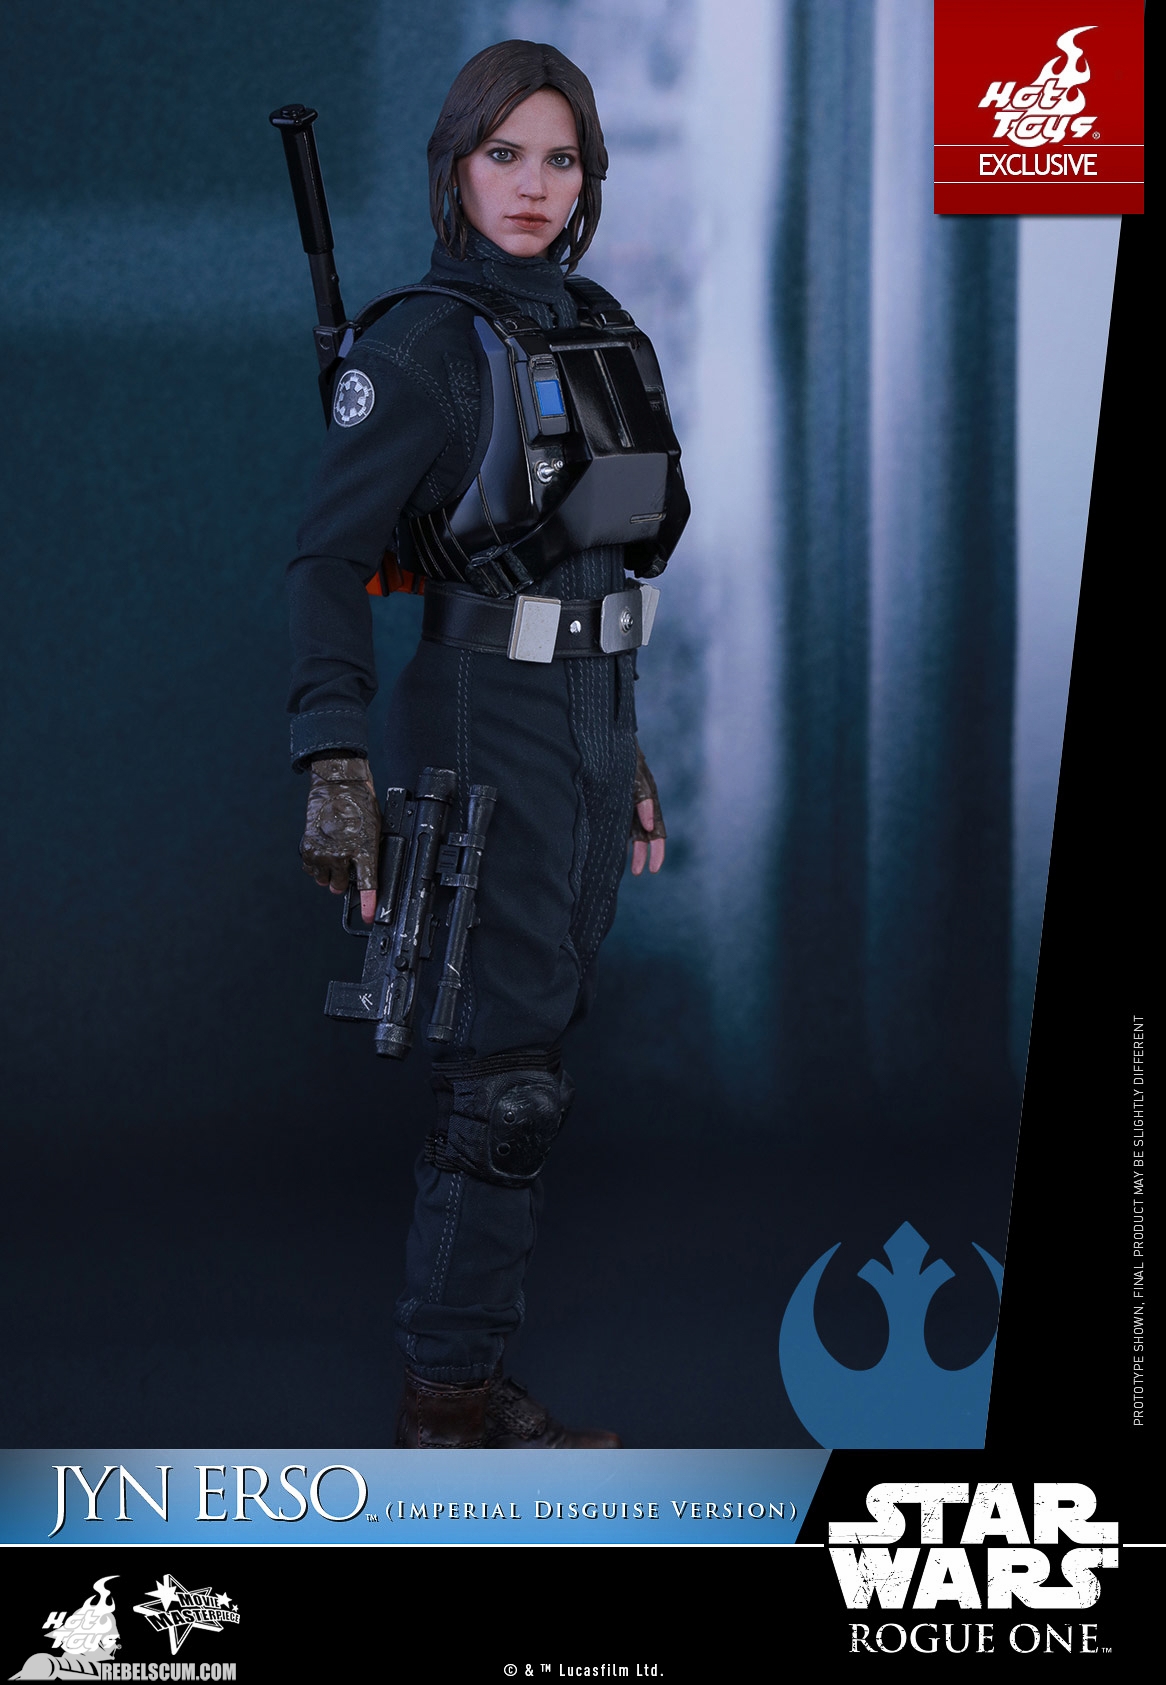 Hot-Toys-MMS419-Rogue-One-Jyn-Erso-Imperial-Disguise-001.jpg